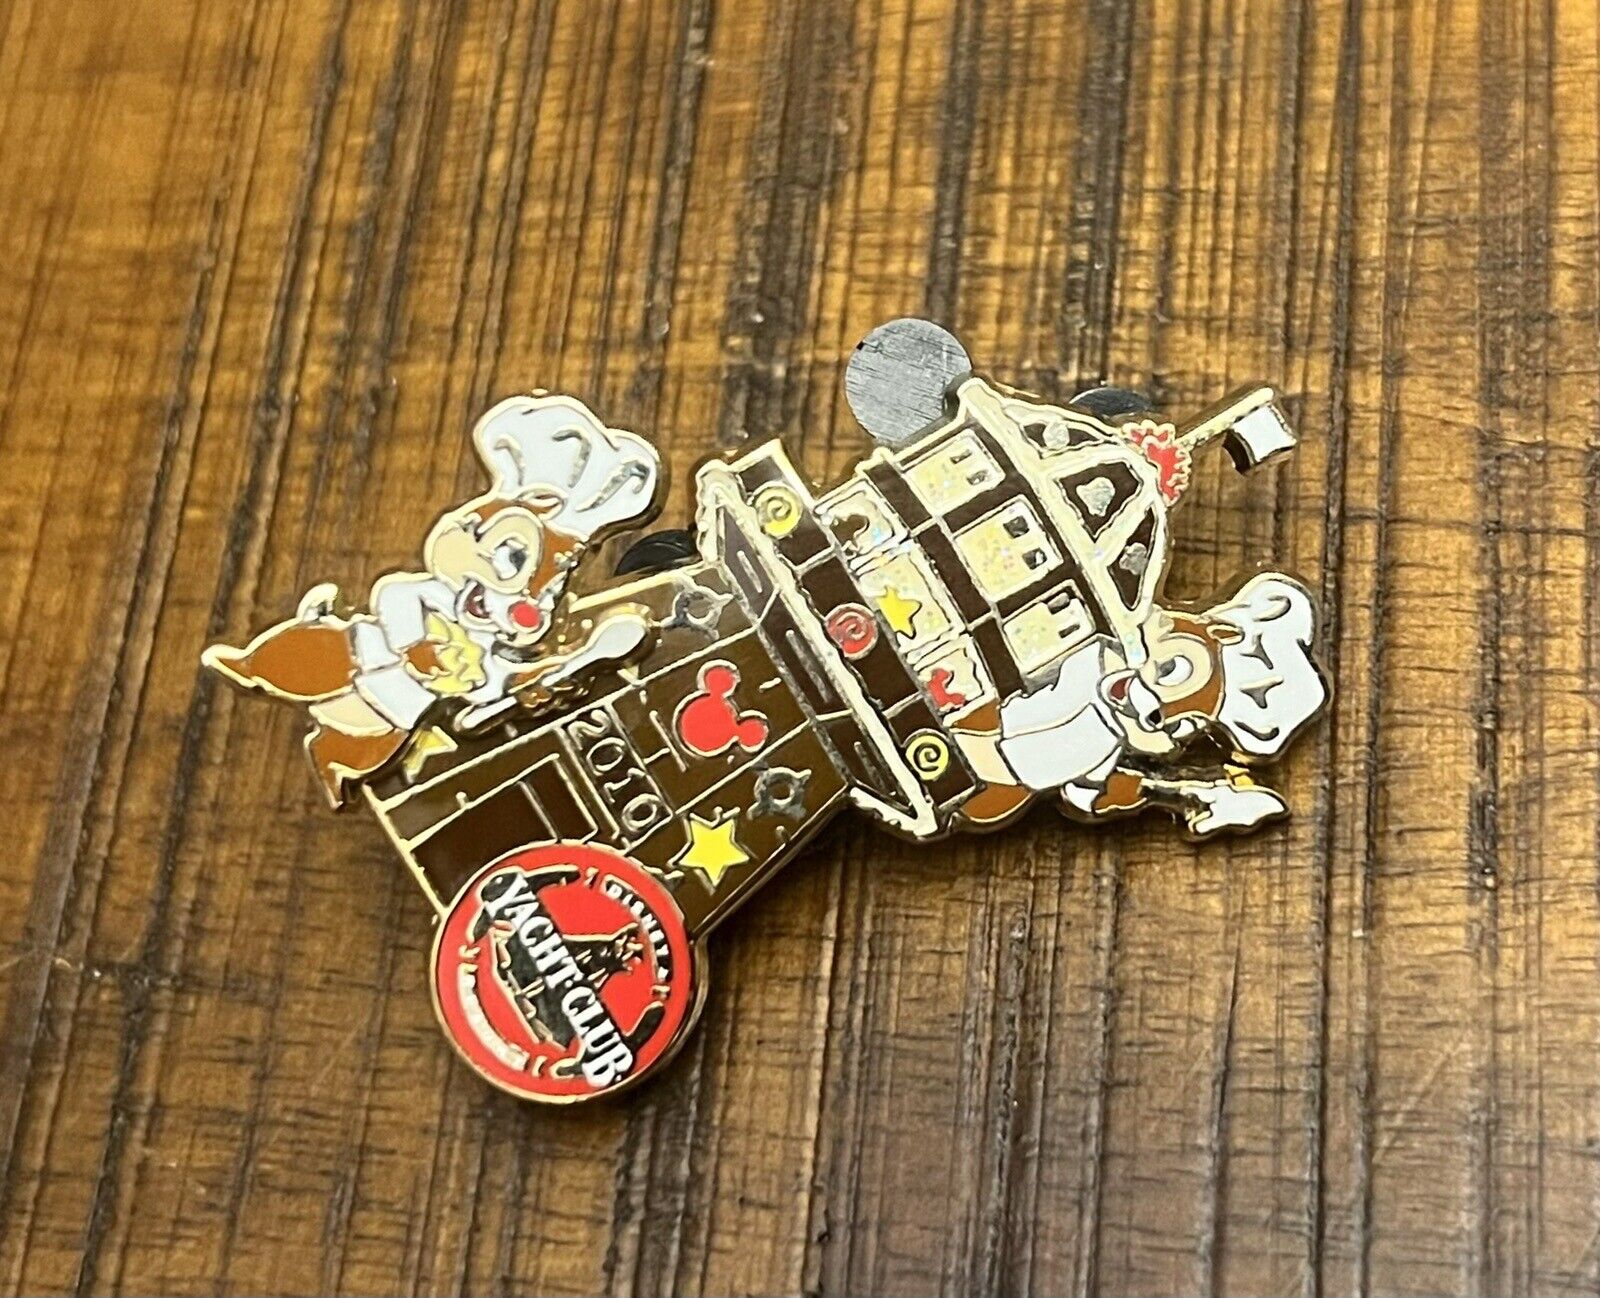 Scarce Le 750 Chip and Dale Yacht Club Disney Pin